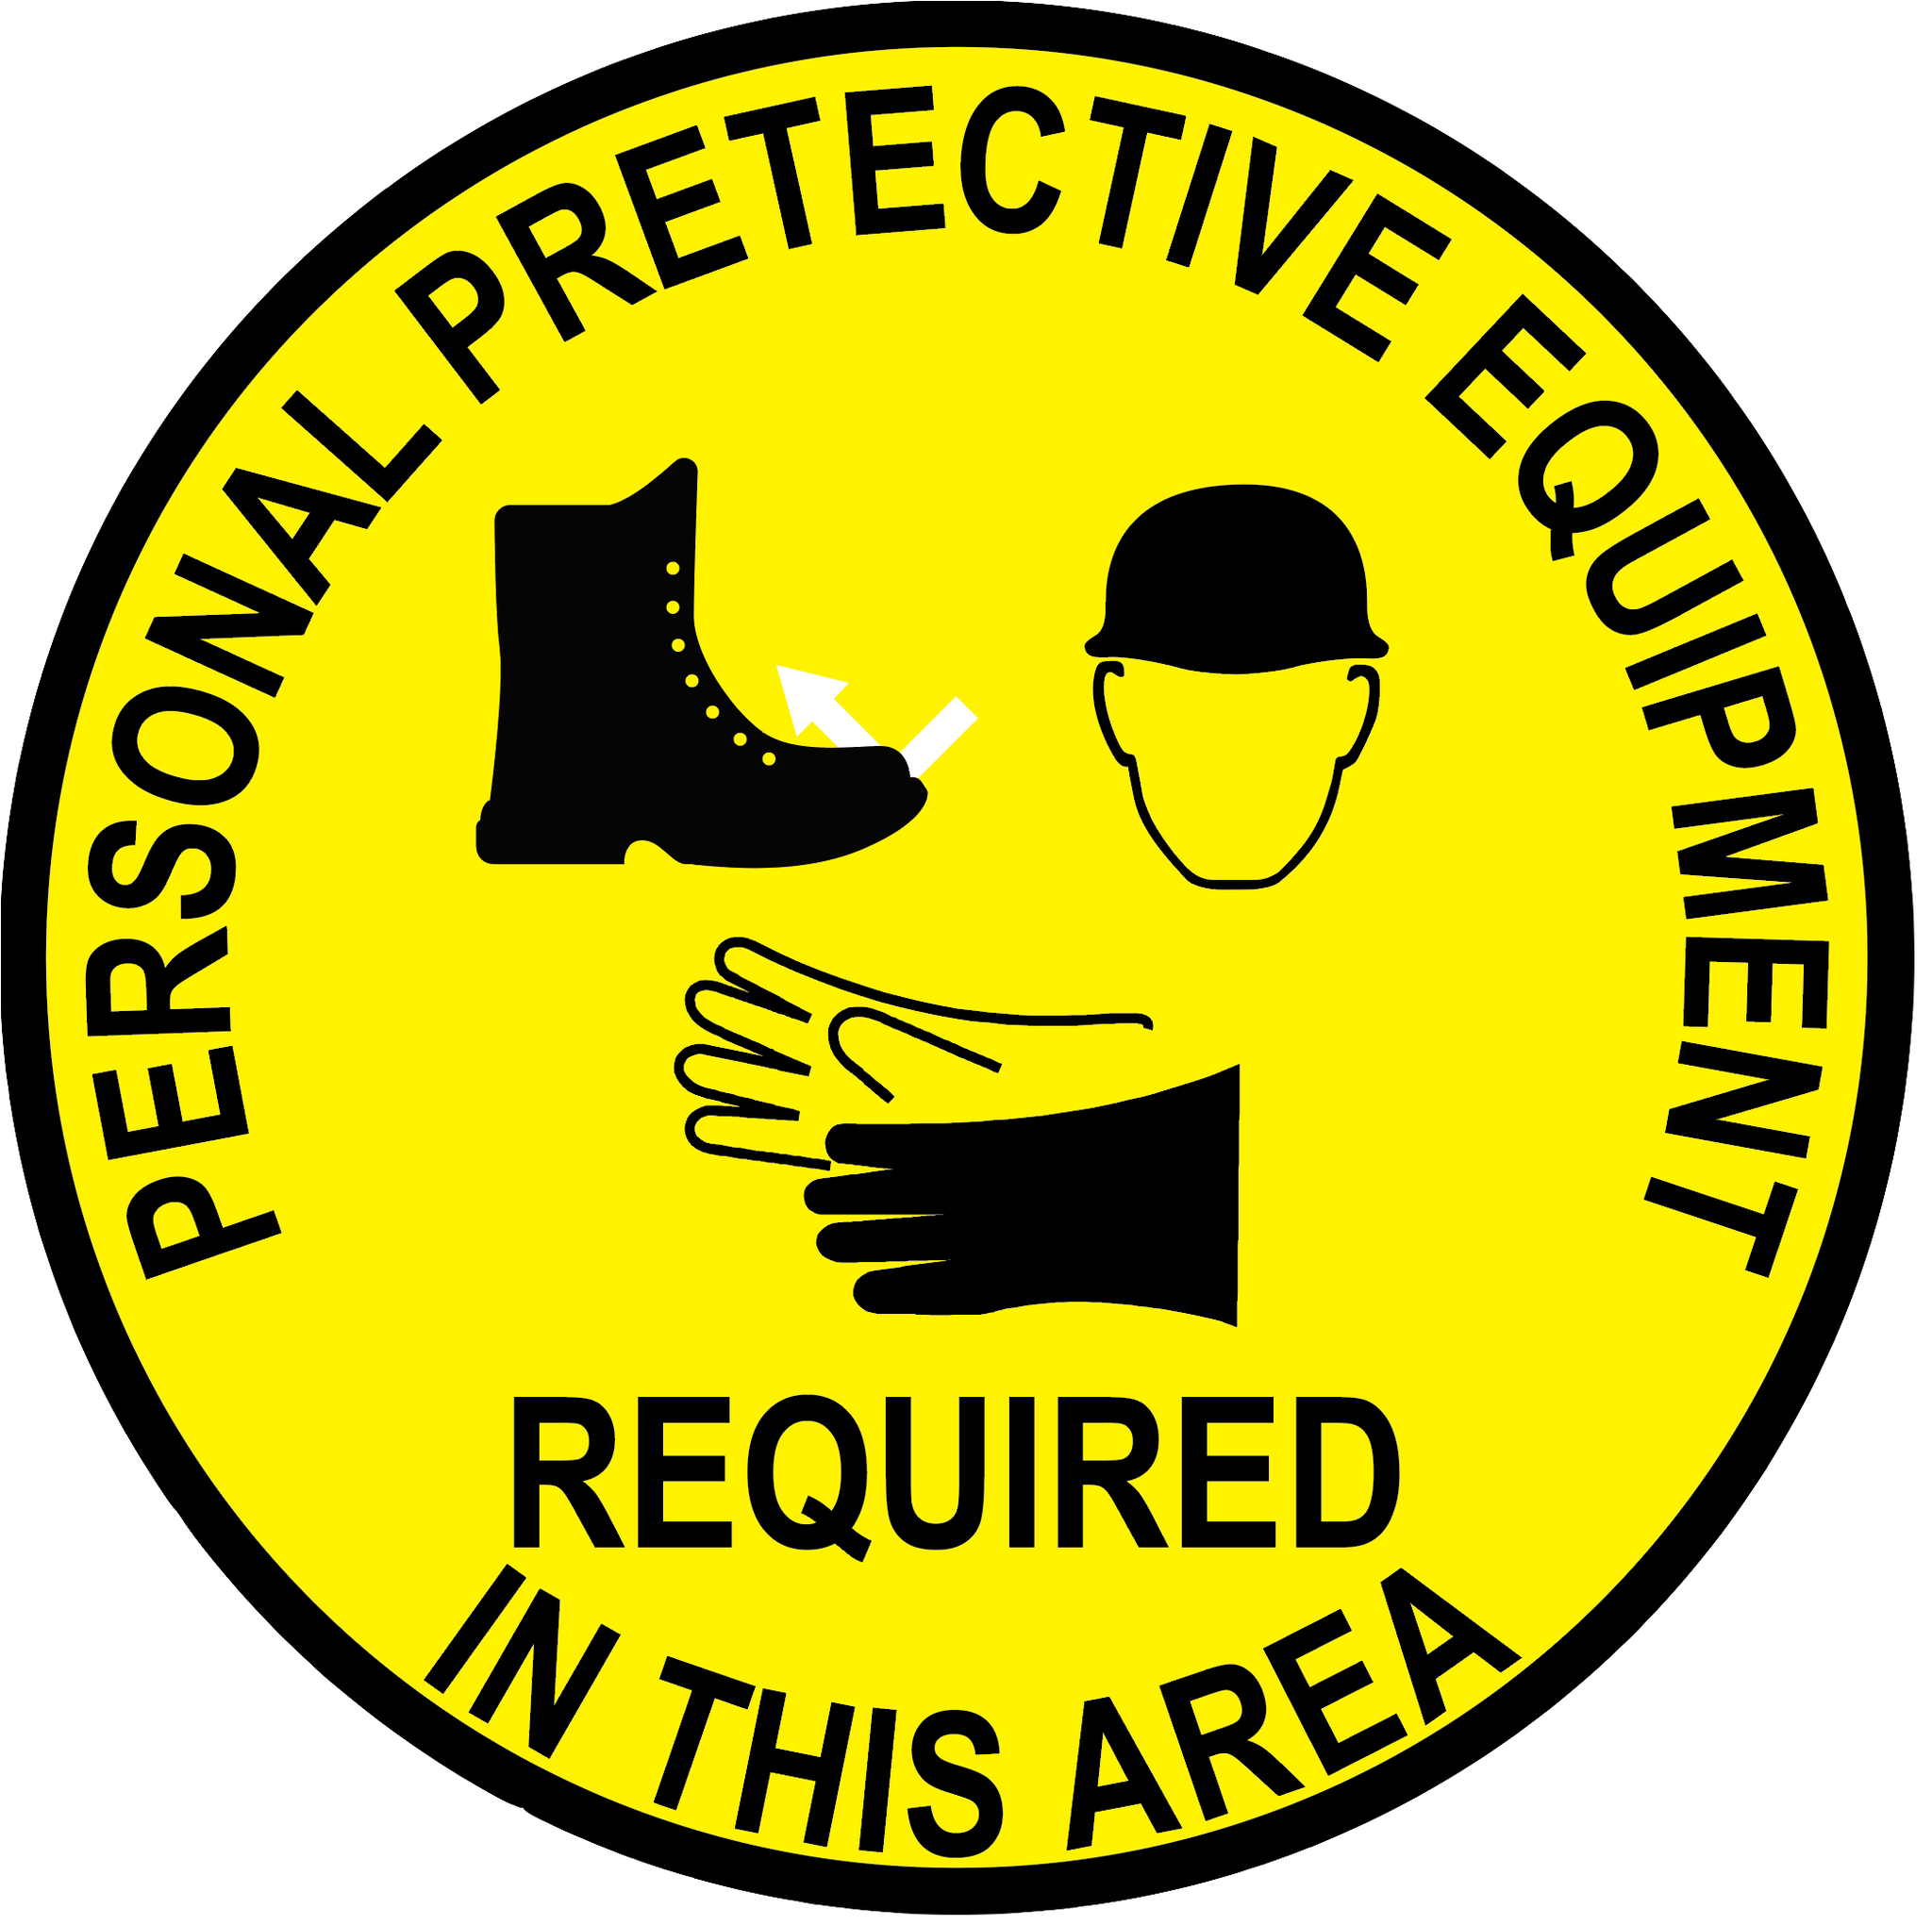 "Personal Protective Equipment Required In This Area" Steel Toe Shoes, Hard Hat and Gloves- Durable Matte Laminated Vinyl Floor Sign- Various Sizes Available